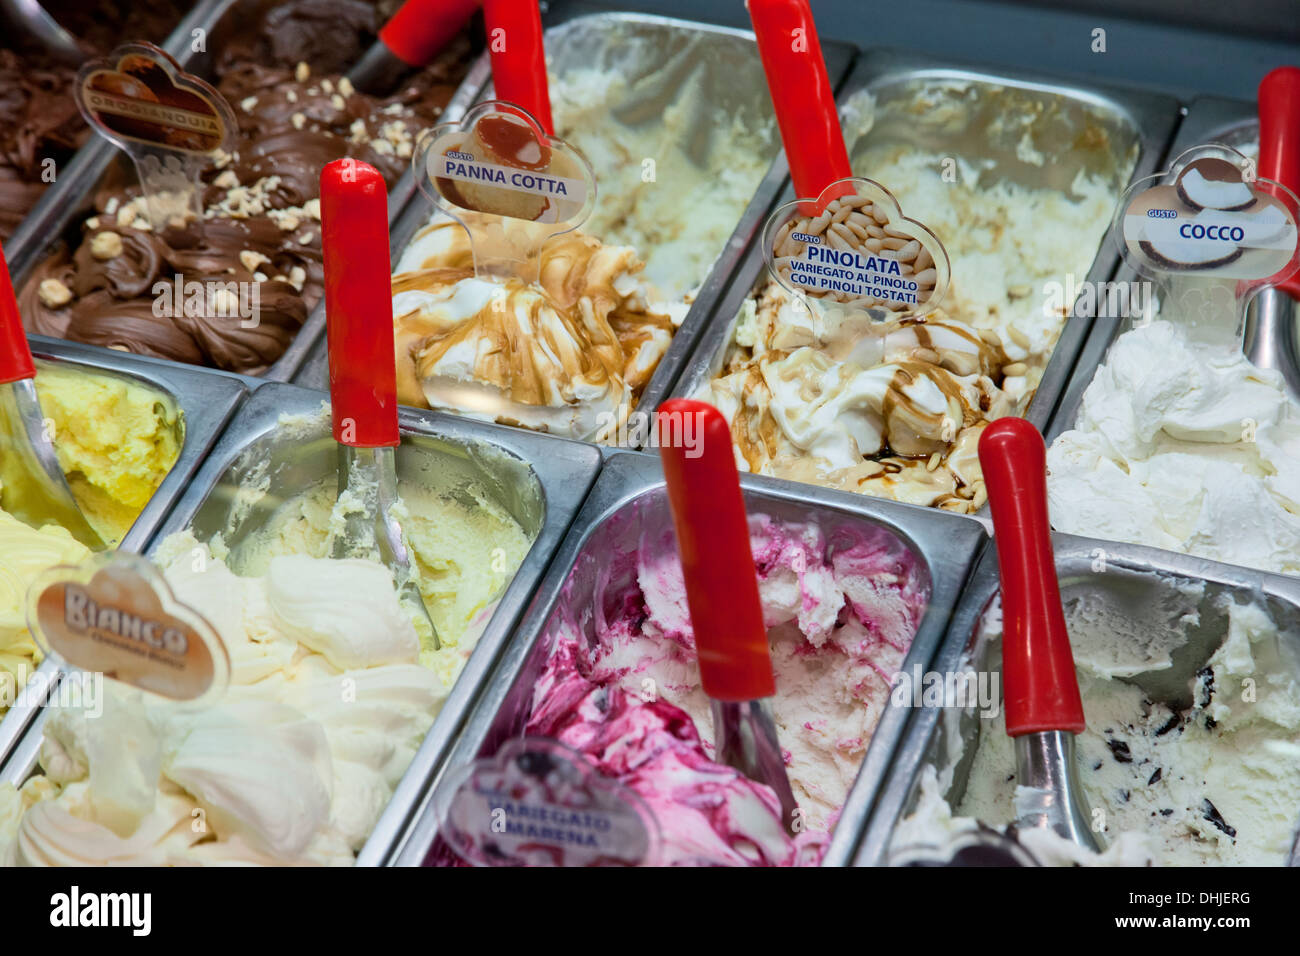 Creamy Gelato is ready to be served at a shop in Rome, Italy. Stock Photo